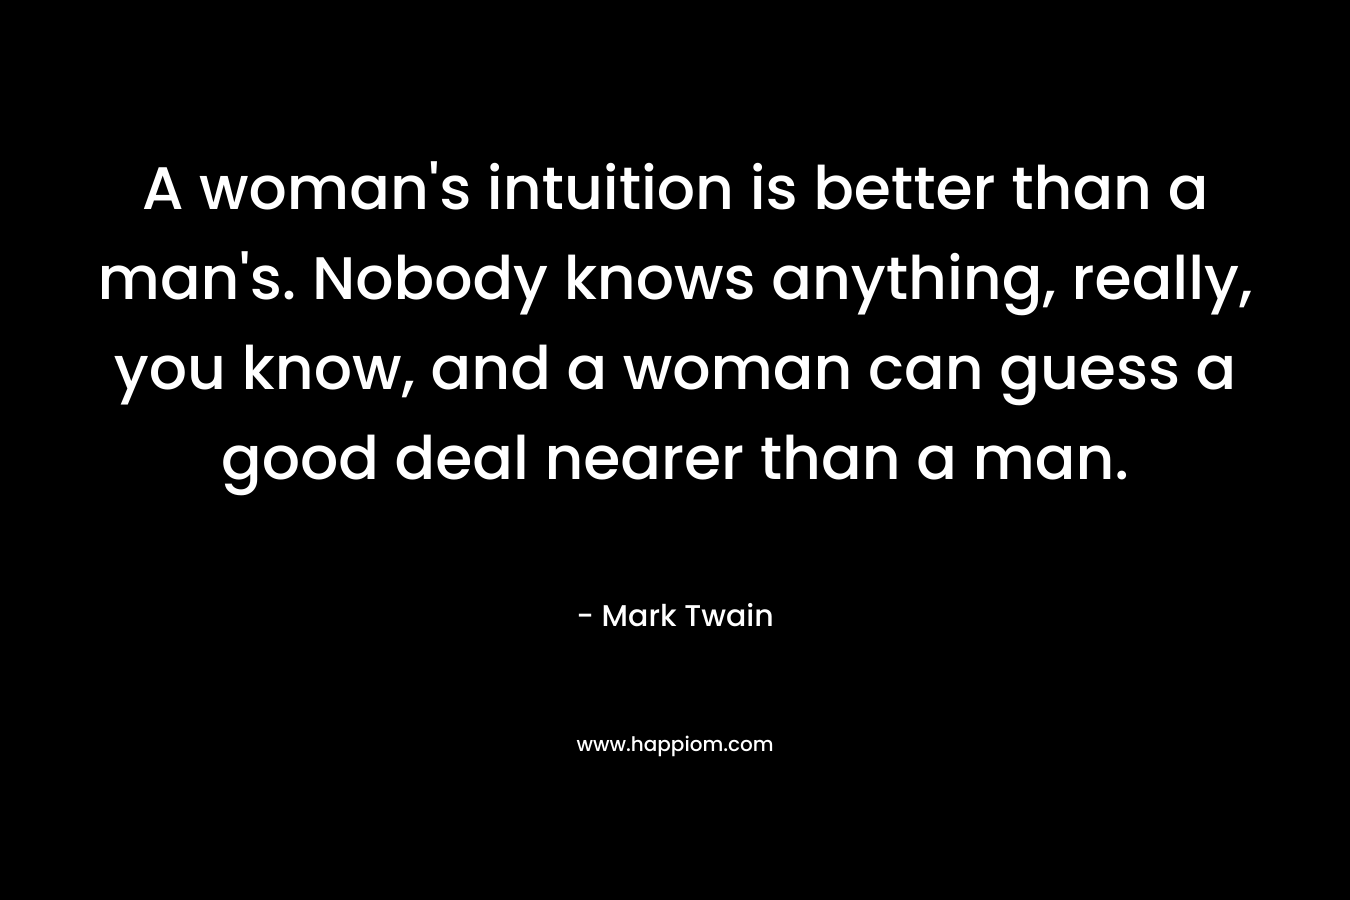 A woman's intuition is better than a man's. Nobody knows anything, really, you know, and a woman can guess a good deal nearer than a man.